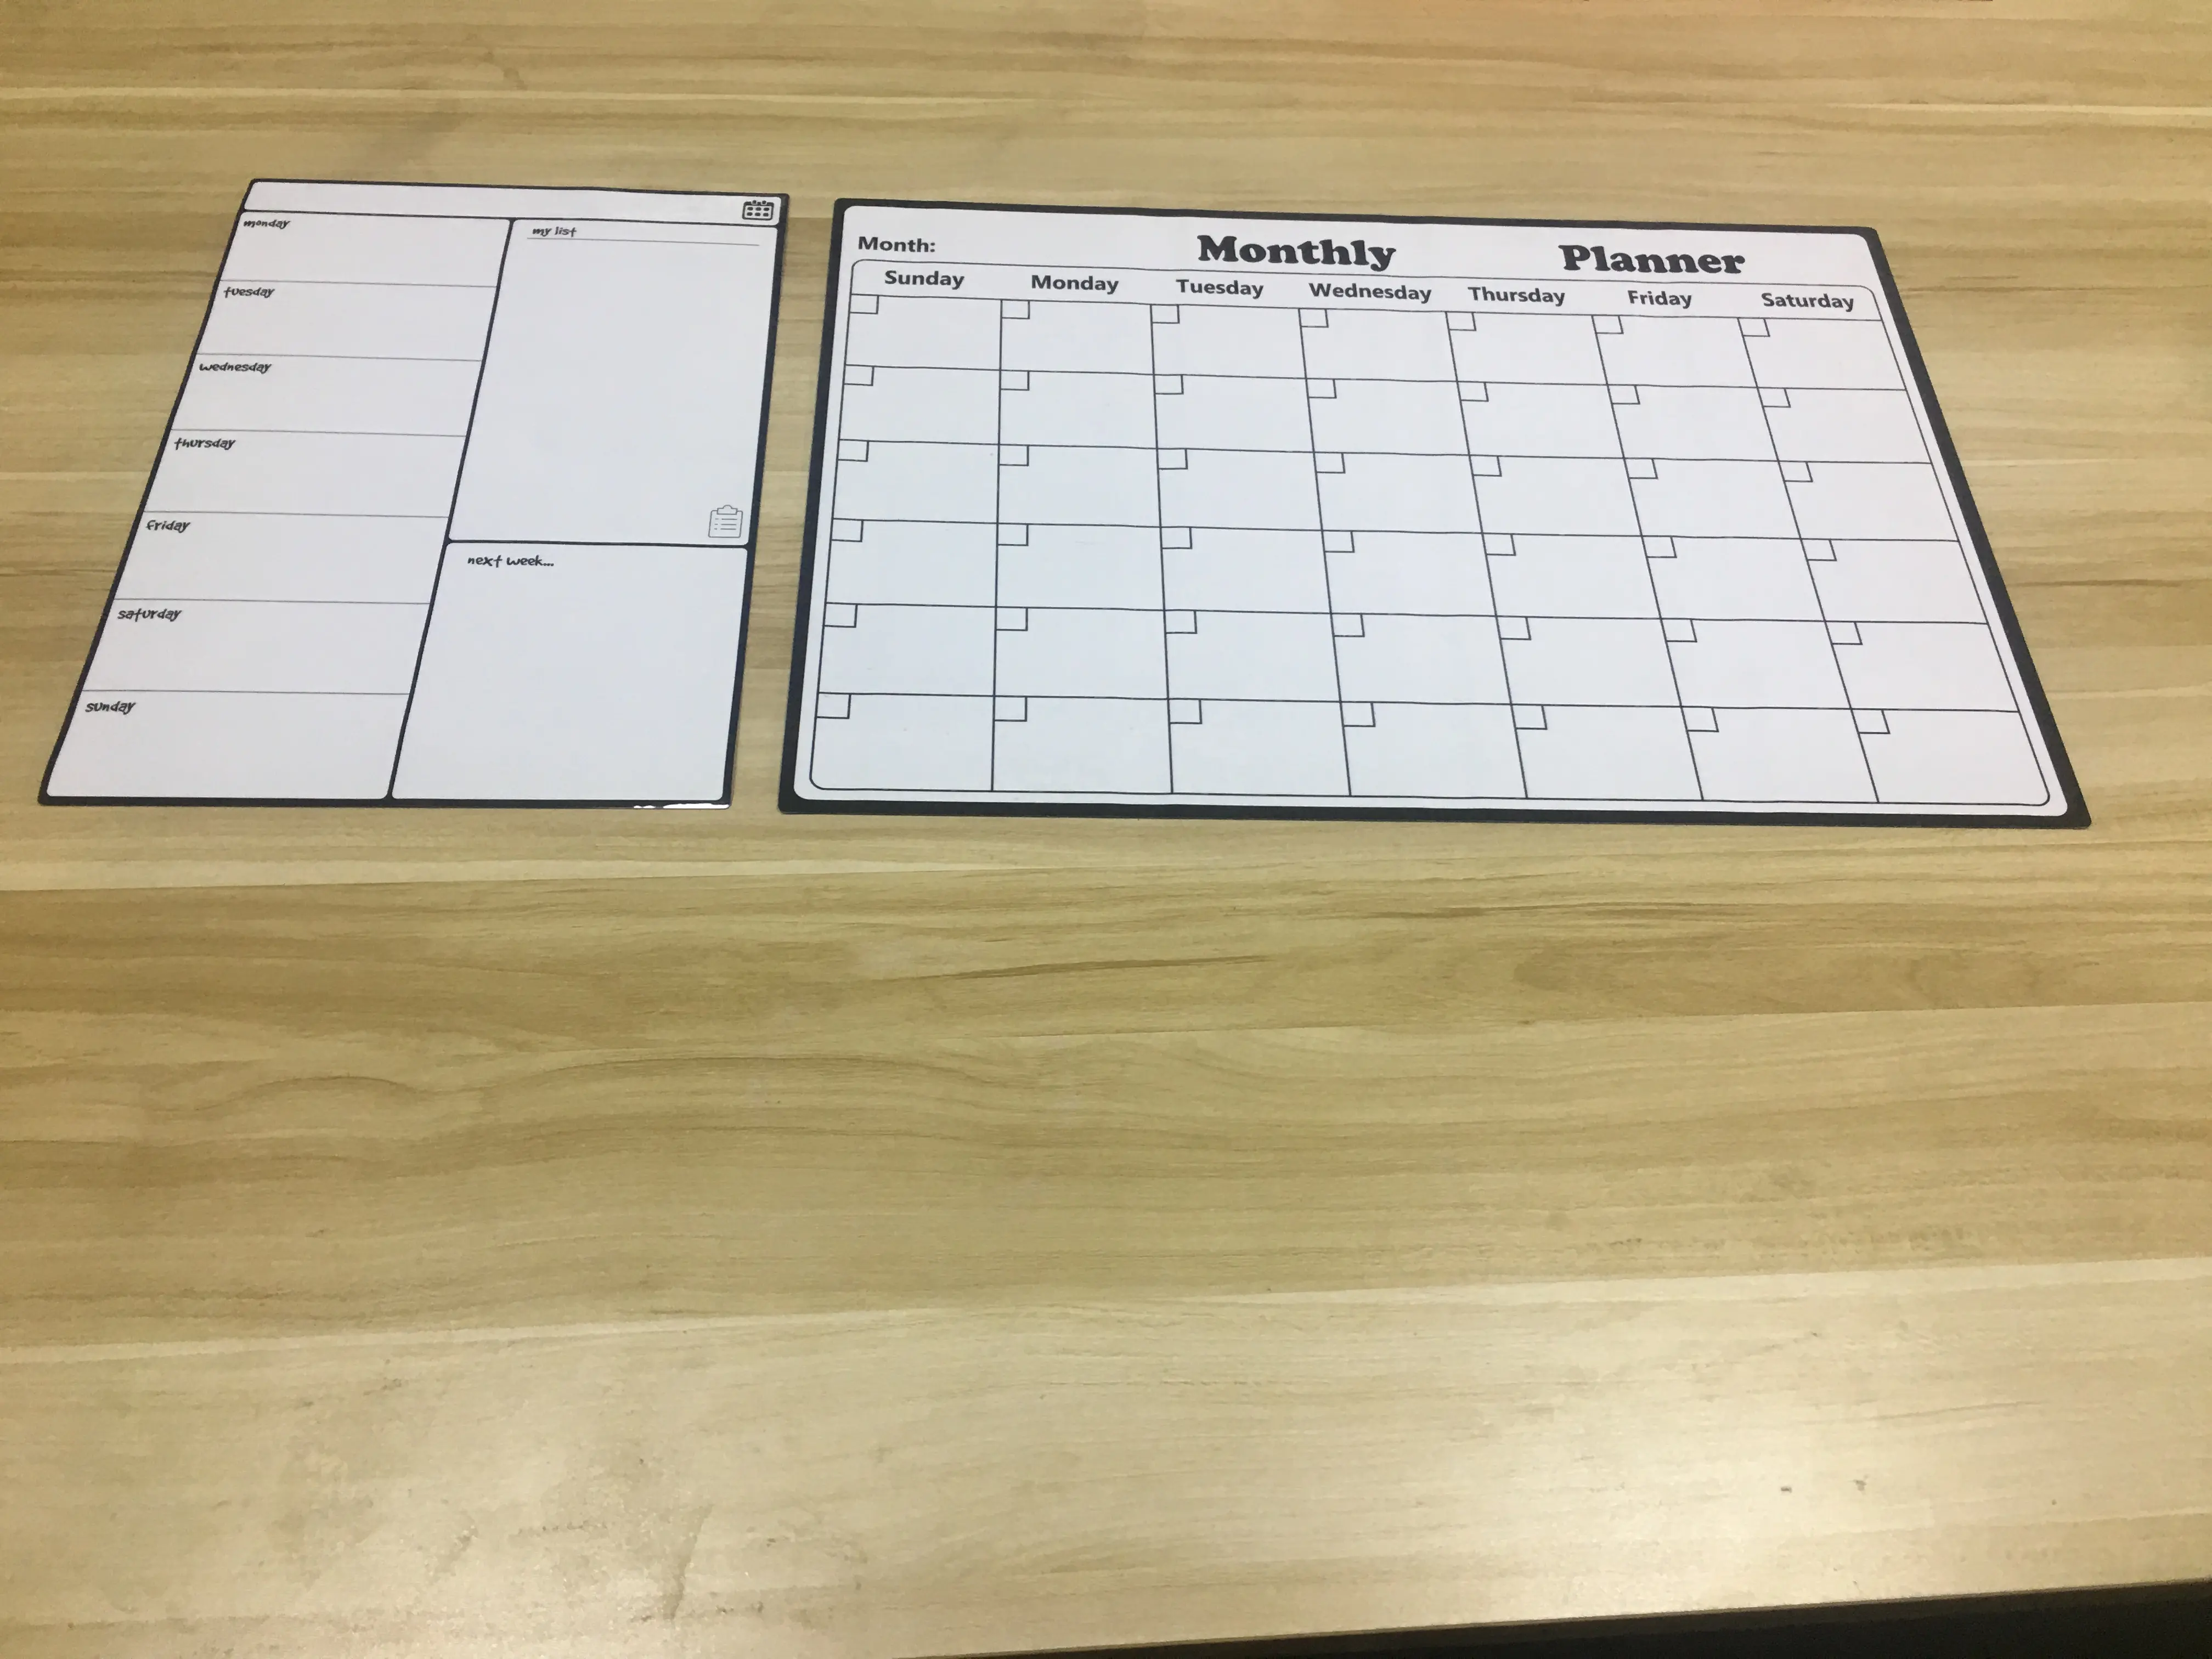 16 X 12" Flexible magnetic weekly planner Dry Erase lap board,packed in Tube,accessory 4 quality makers/1 erase